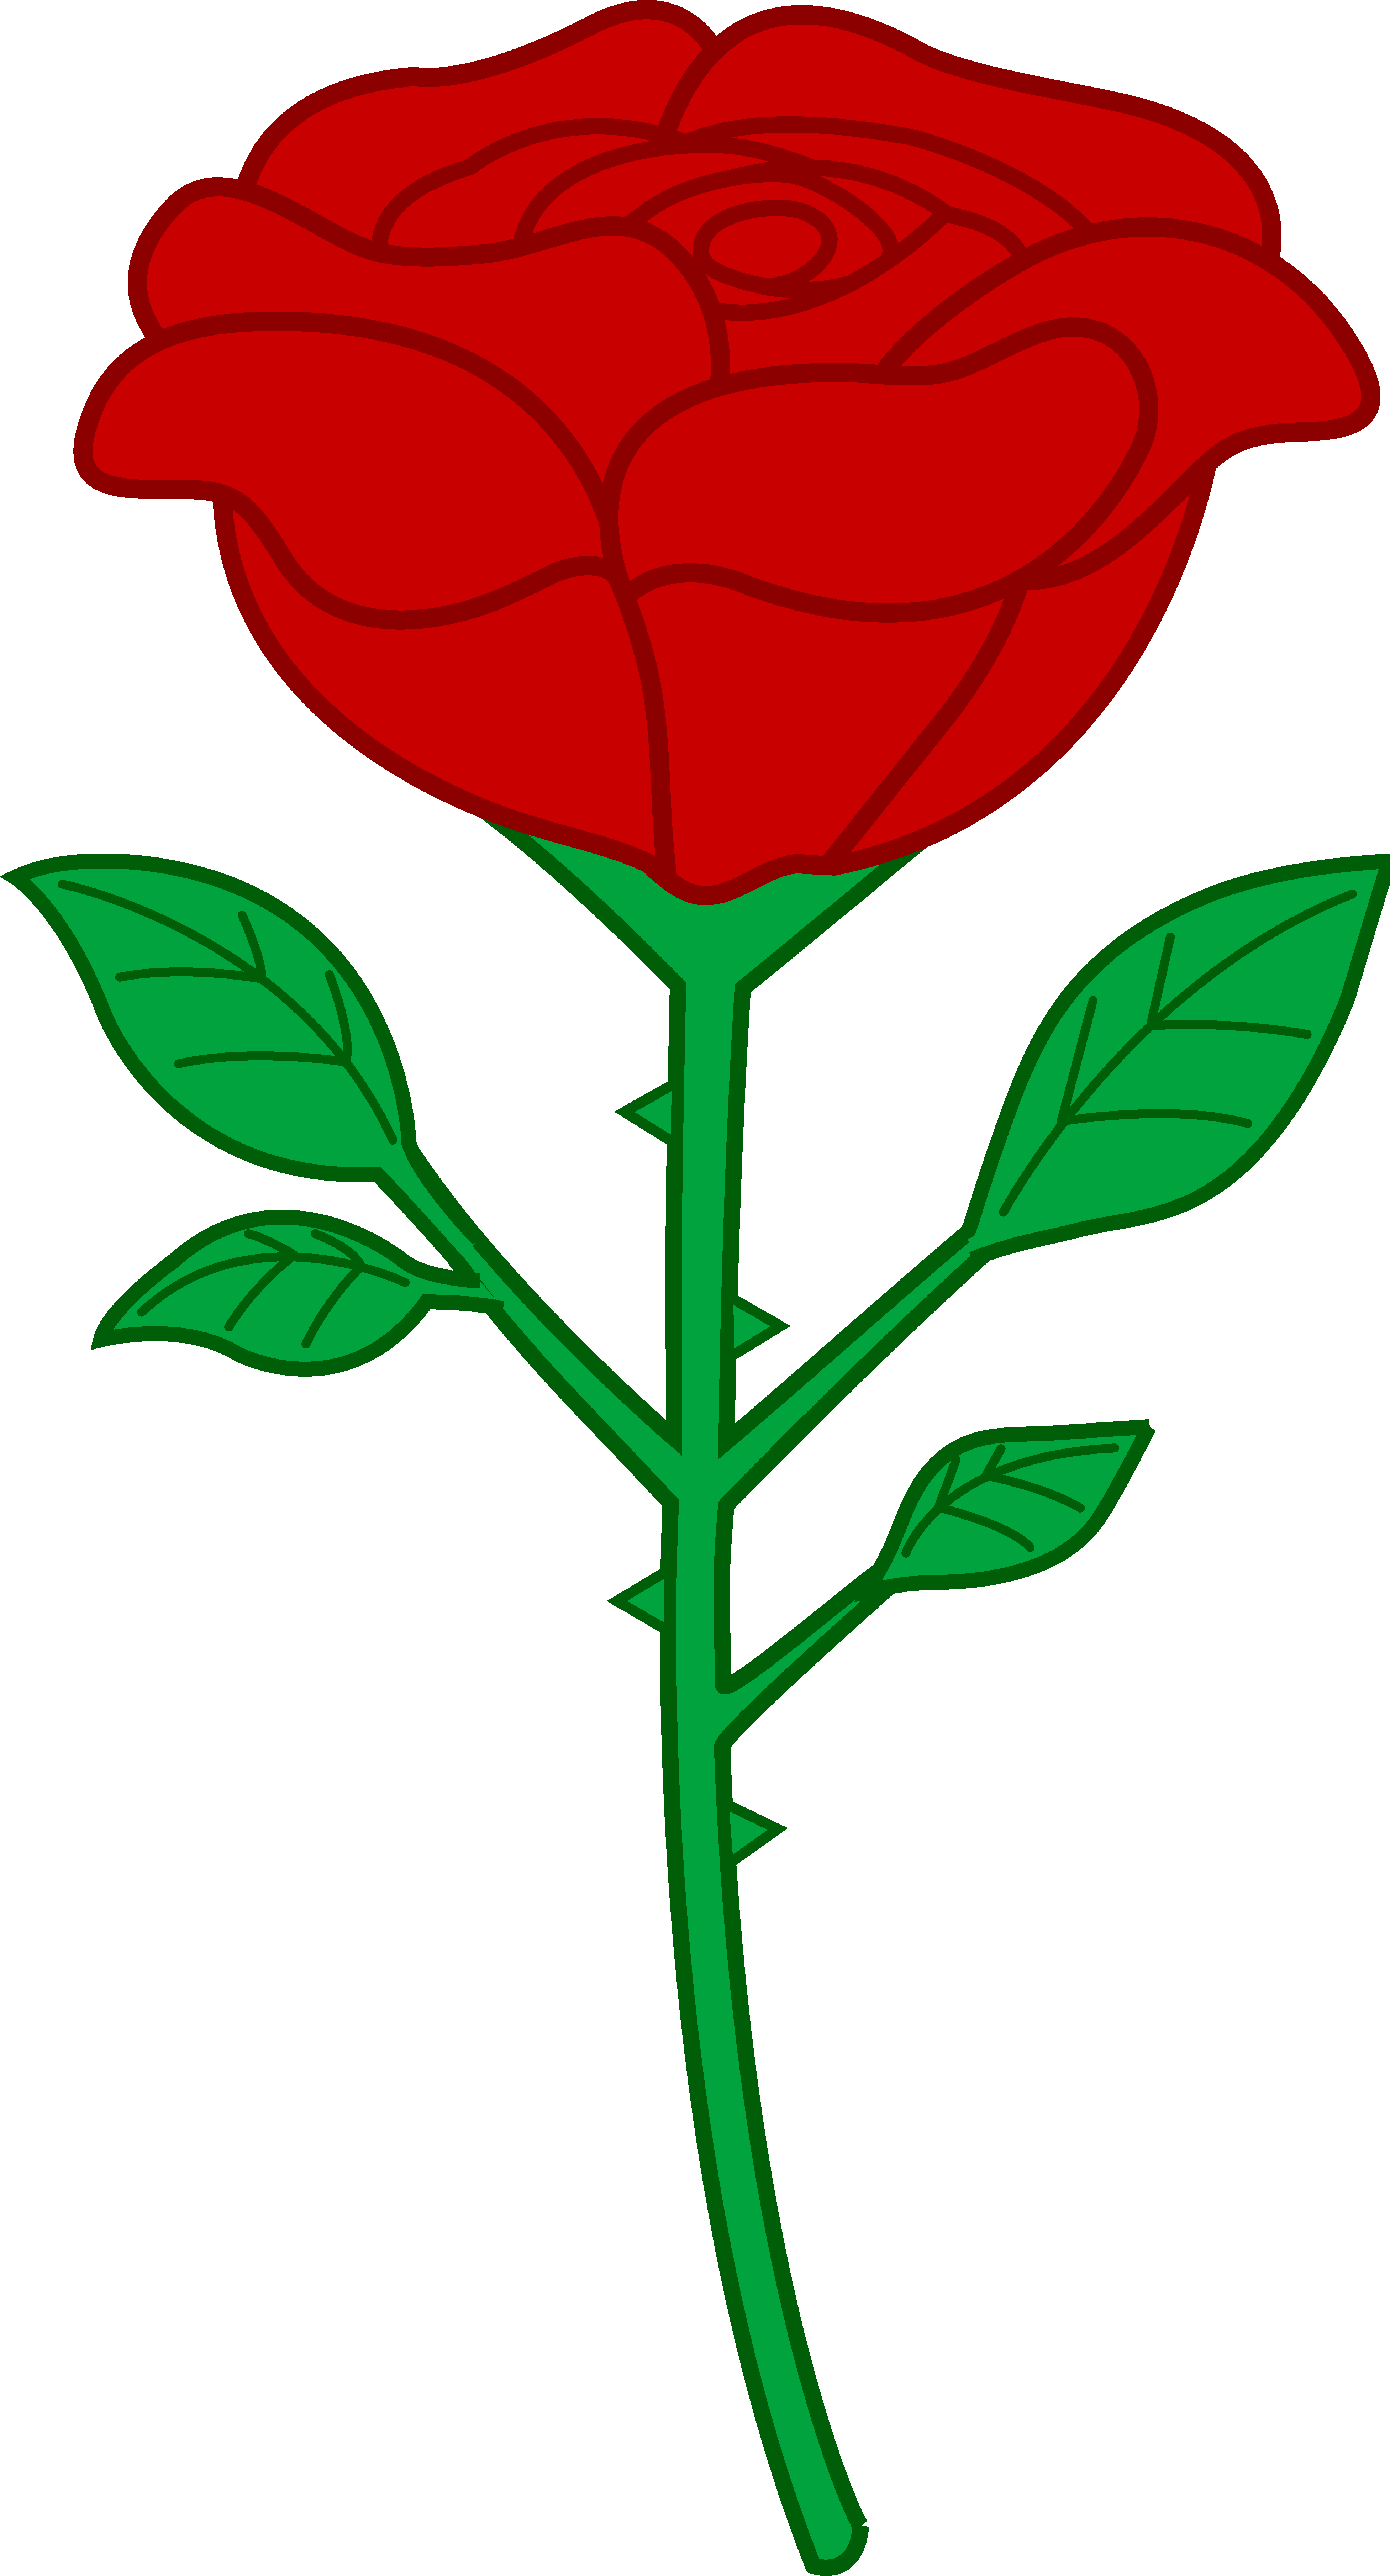 Red Rose Outline - ClipArt Best